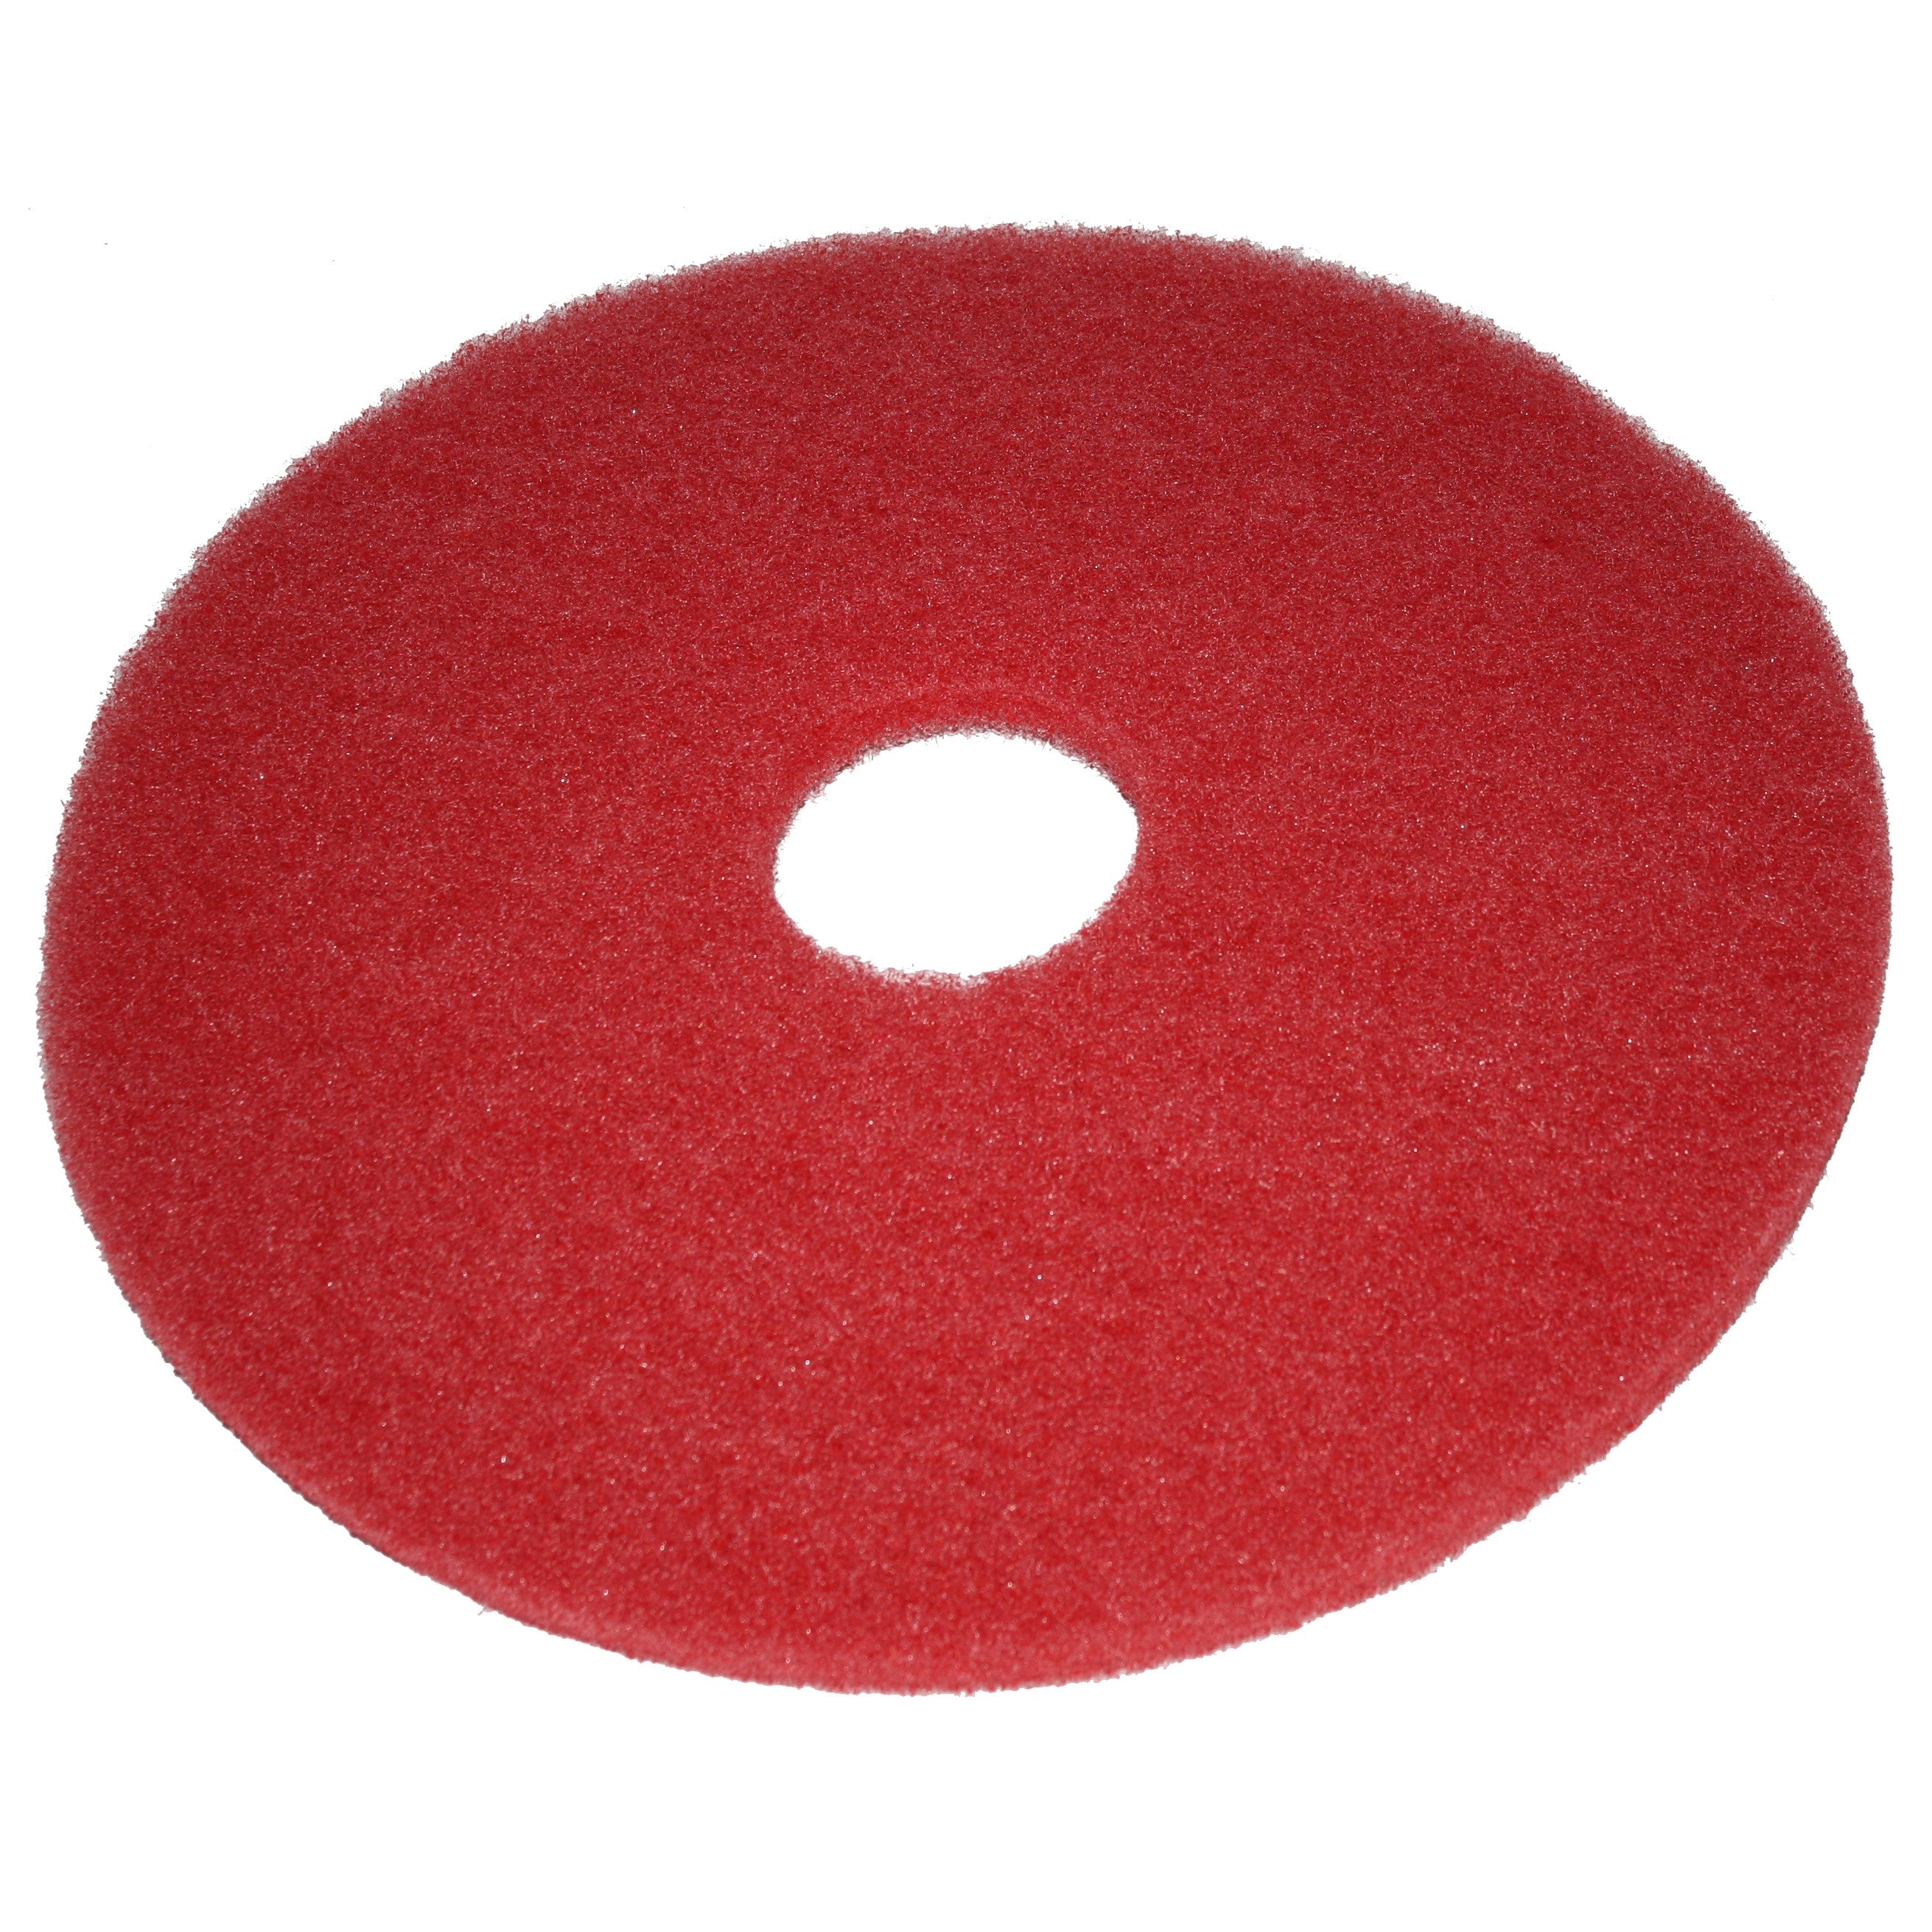 Pad rouge, Ø 508 mm, polyester